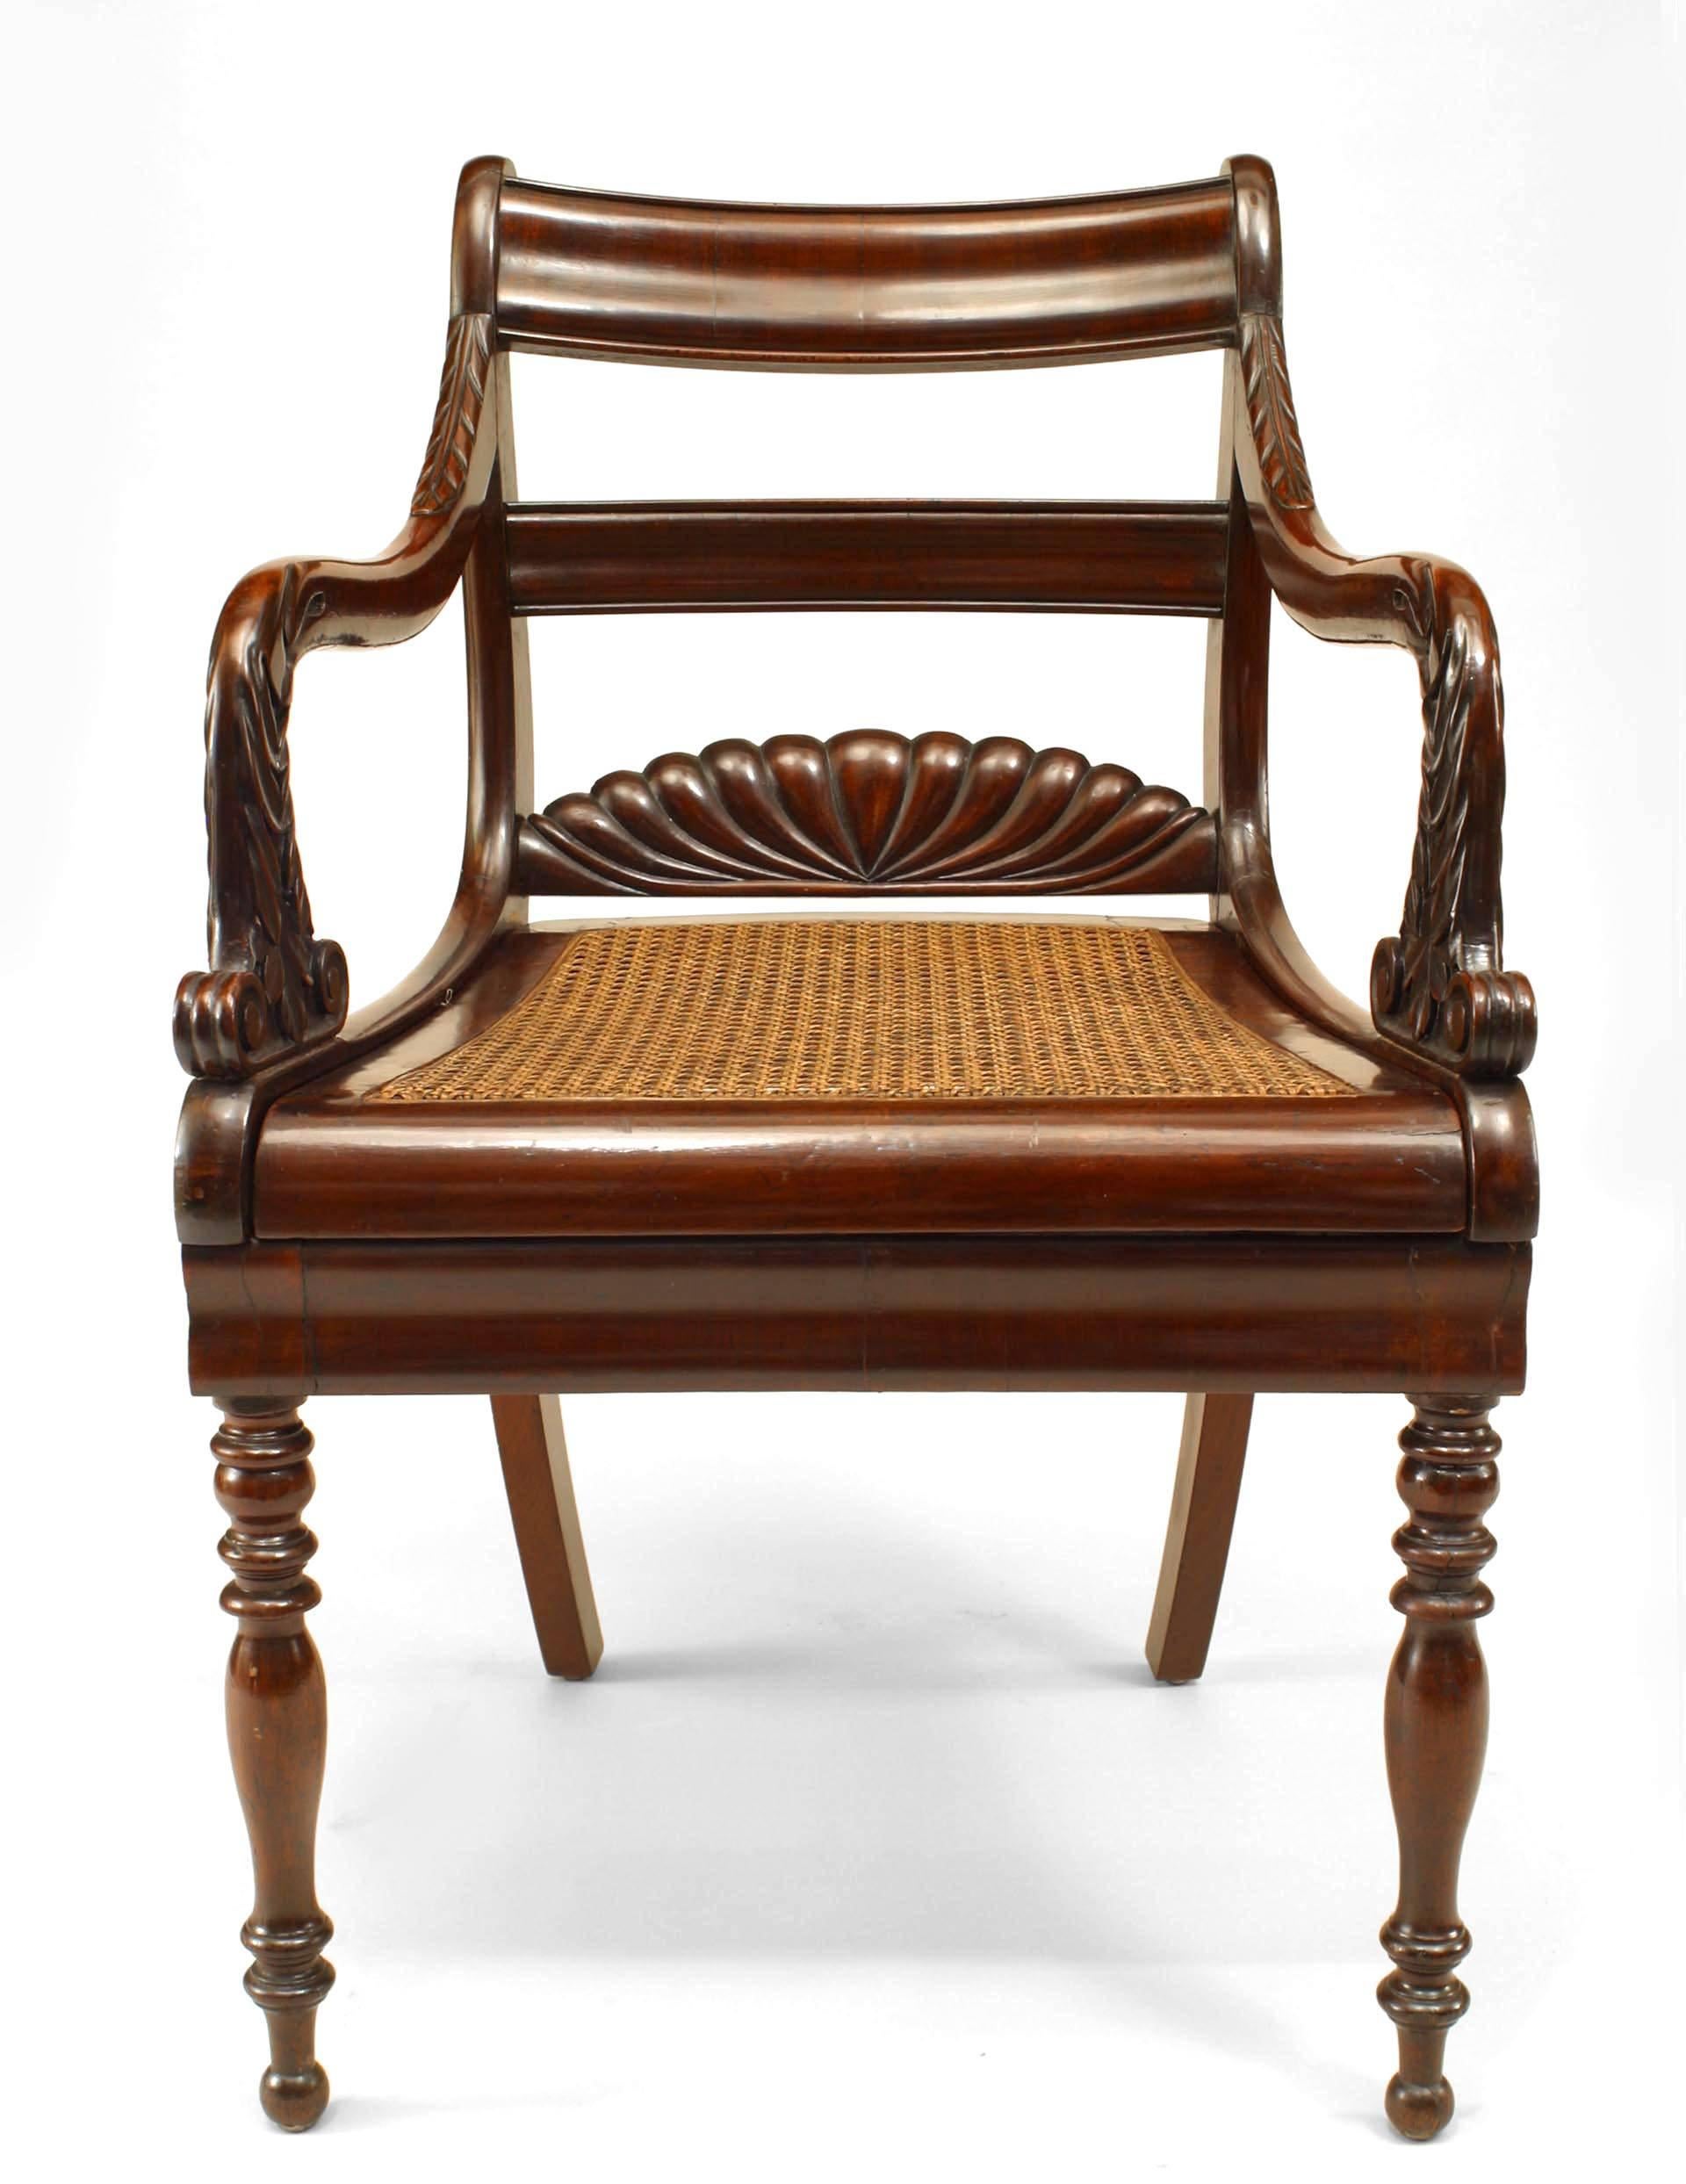 English Regency style (19th Cent) carved mahogany ladder back arm chair with cane seat and fluted fan design back.
